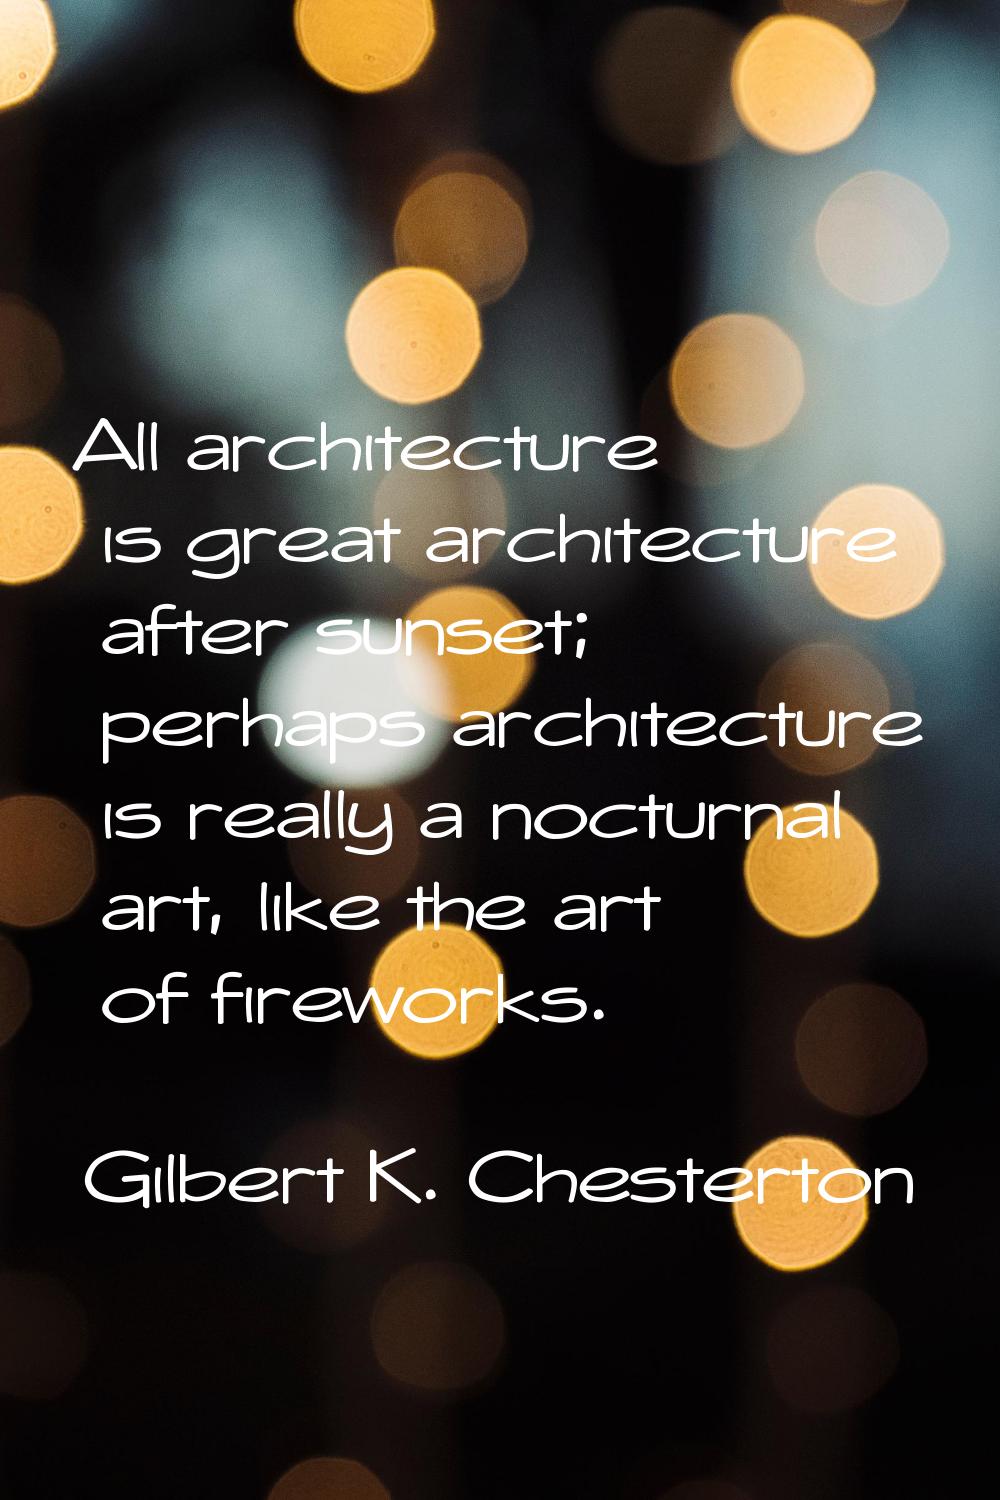 All architecture is great architecture after sunset; perhaps architecture is really a nocturnal art